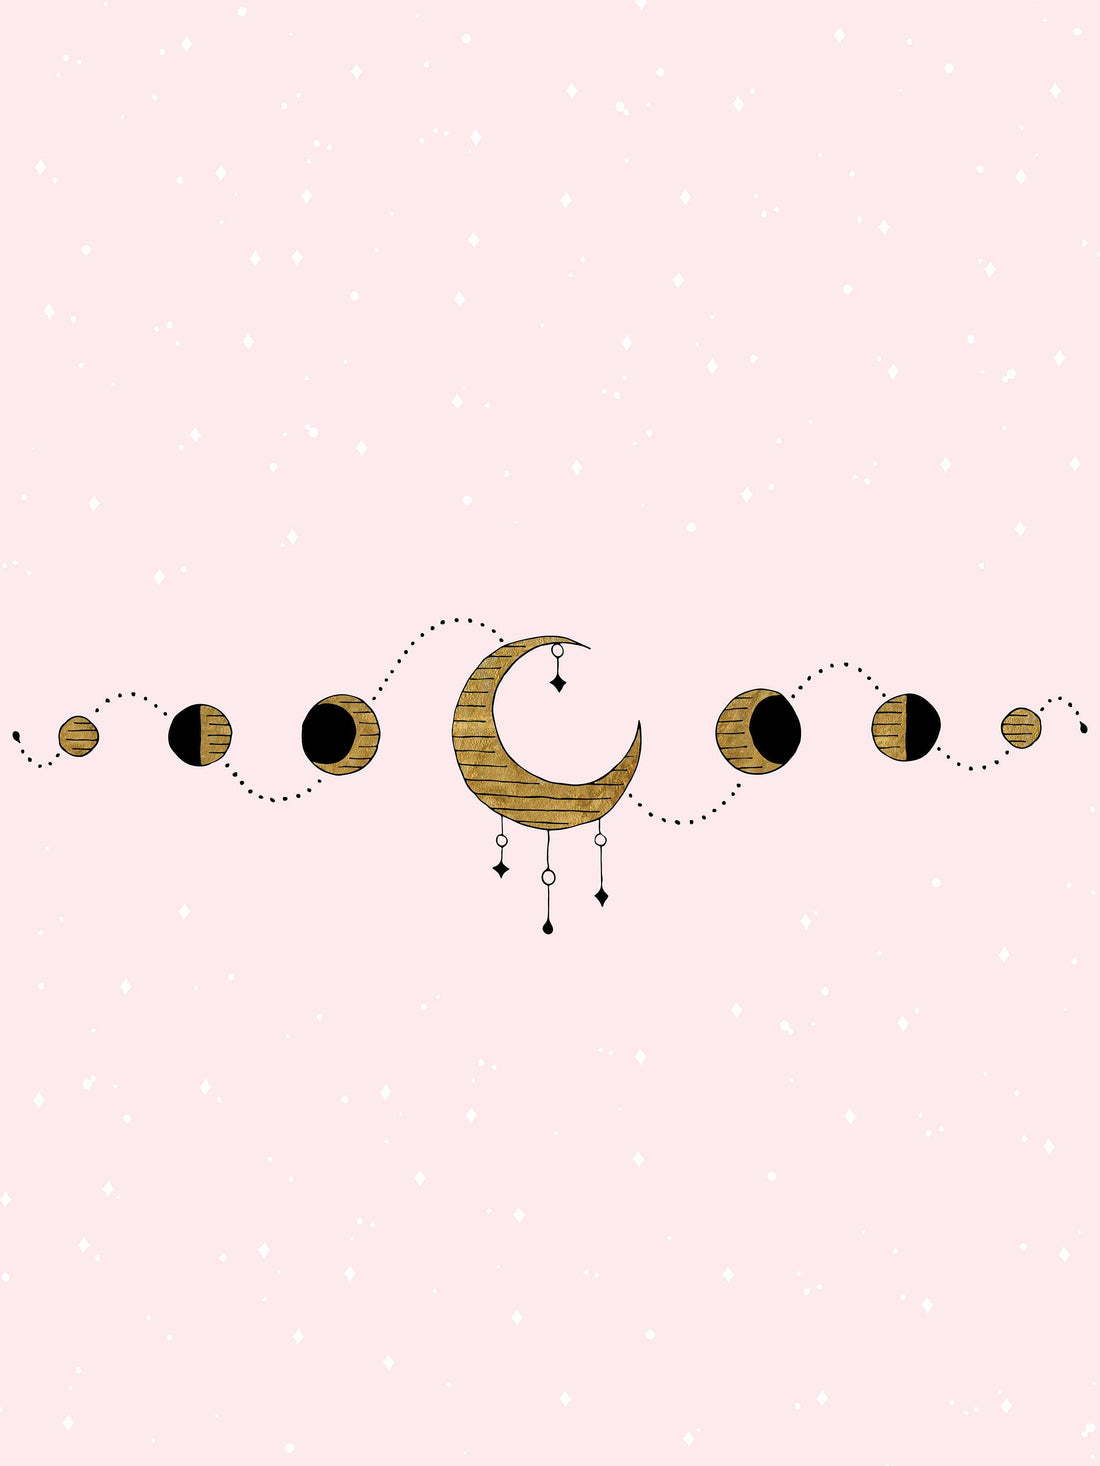 Moon phase desktop and phone wallpaper